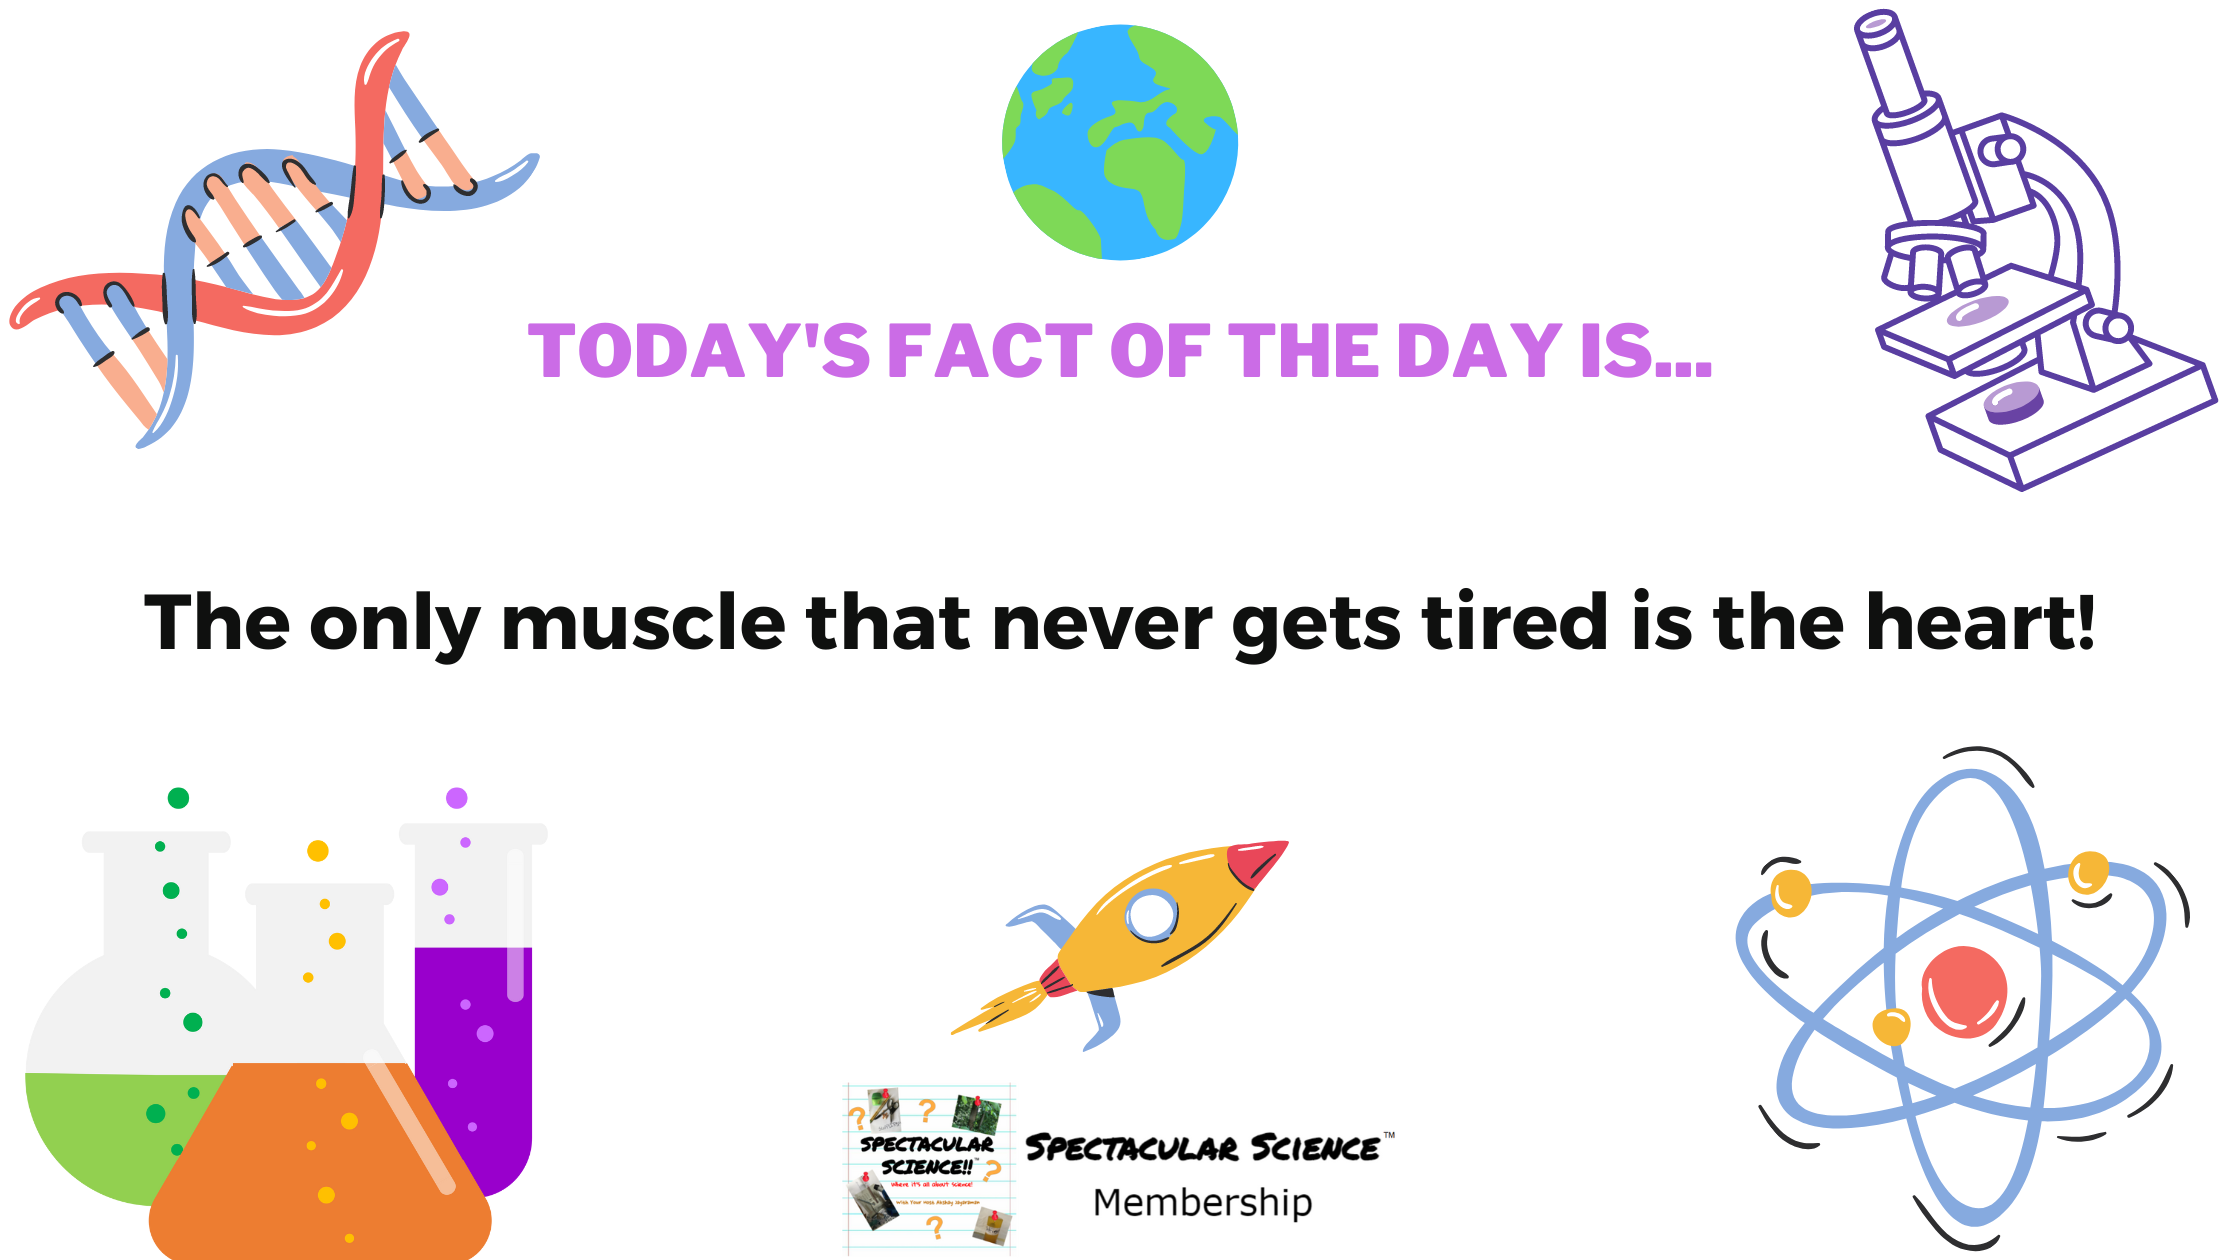 Fact of the Day Image June 8th